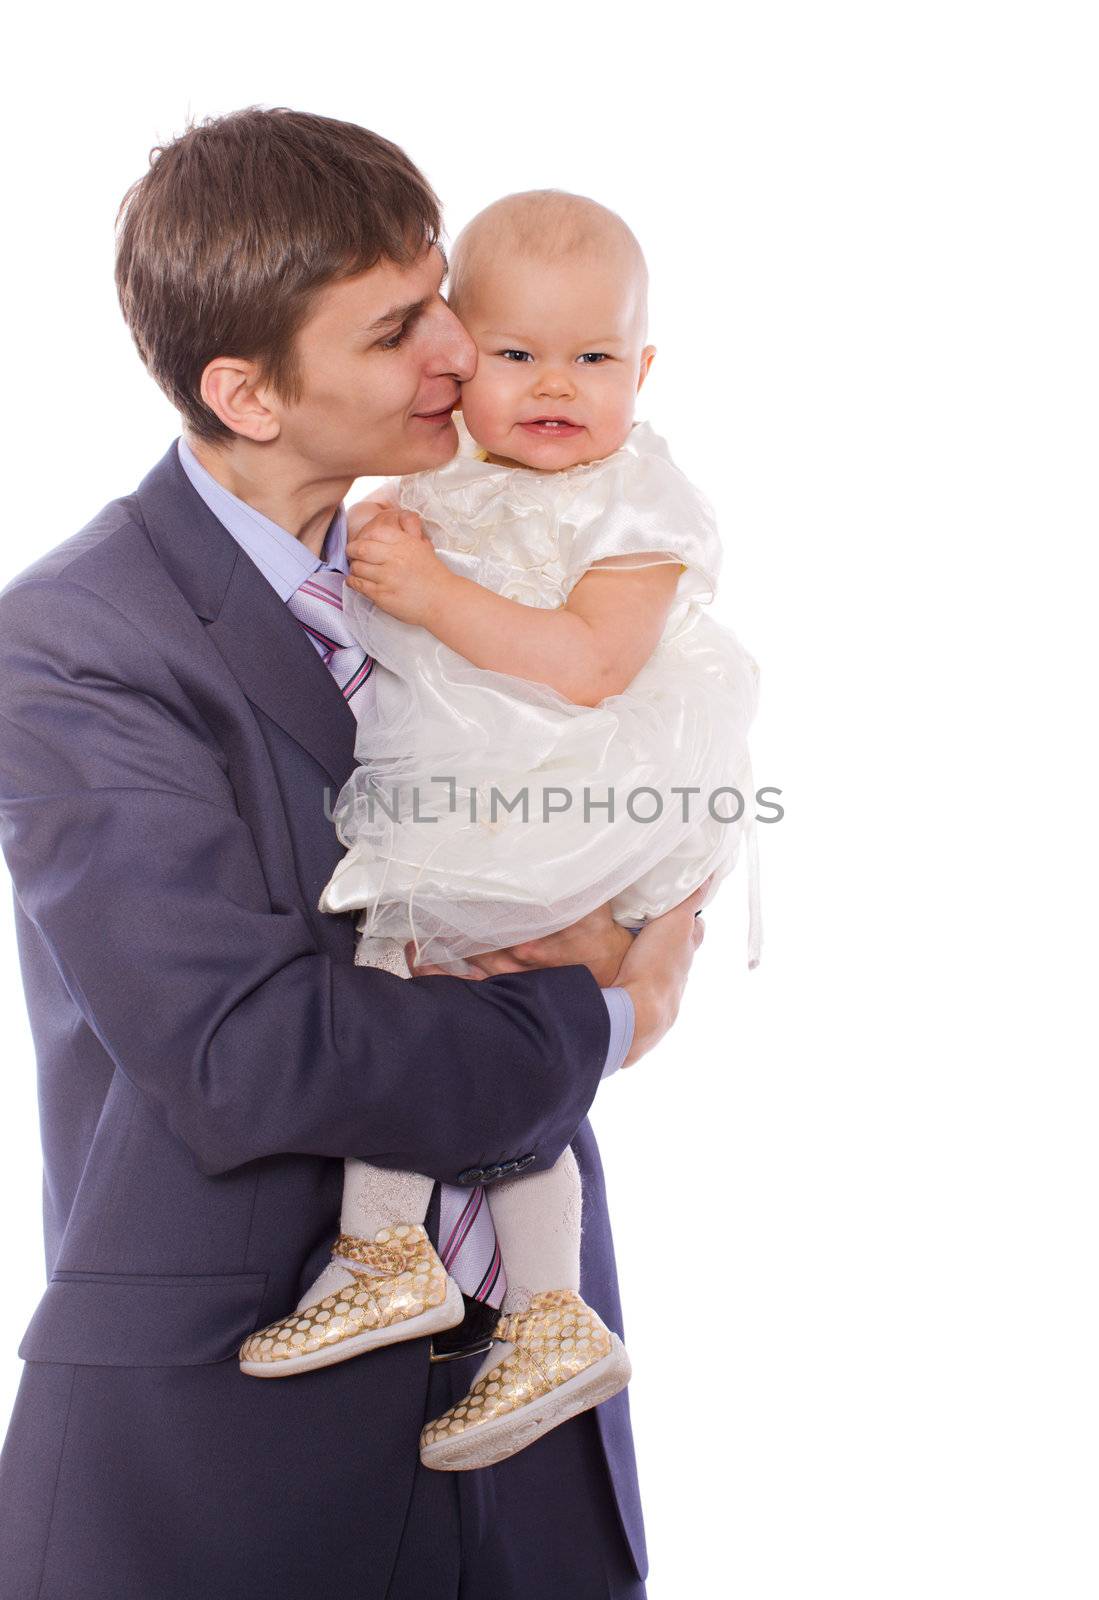 Father and daughter posing together isolated on white